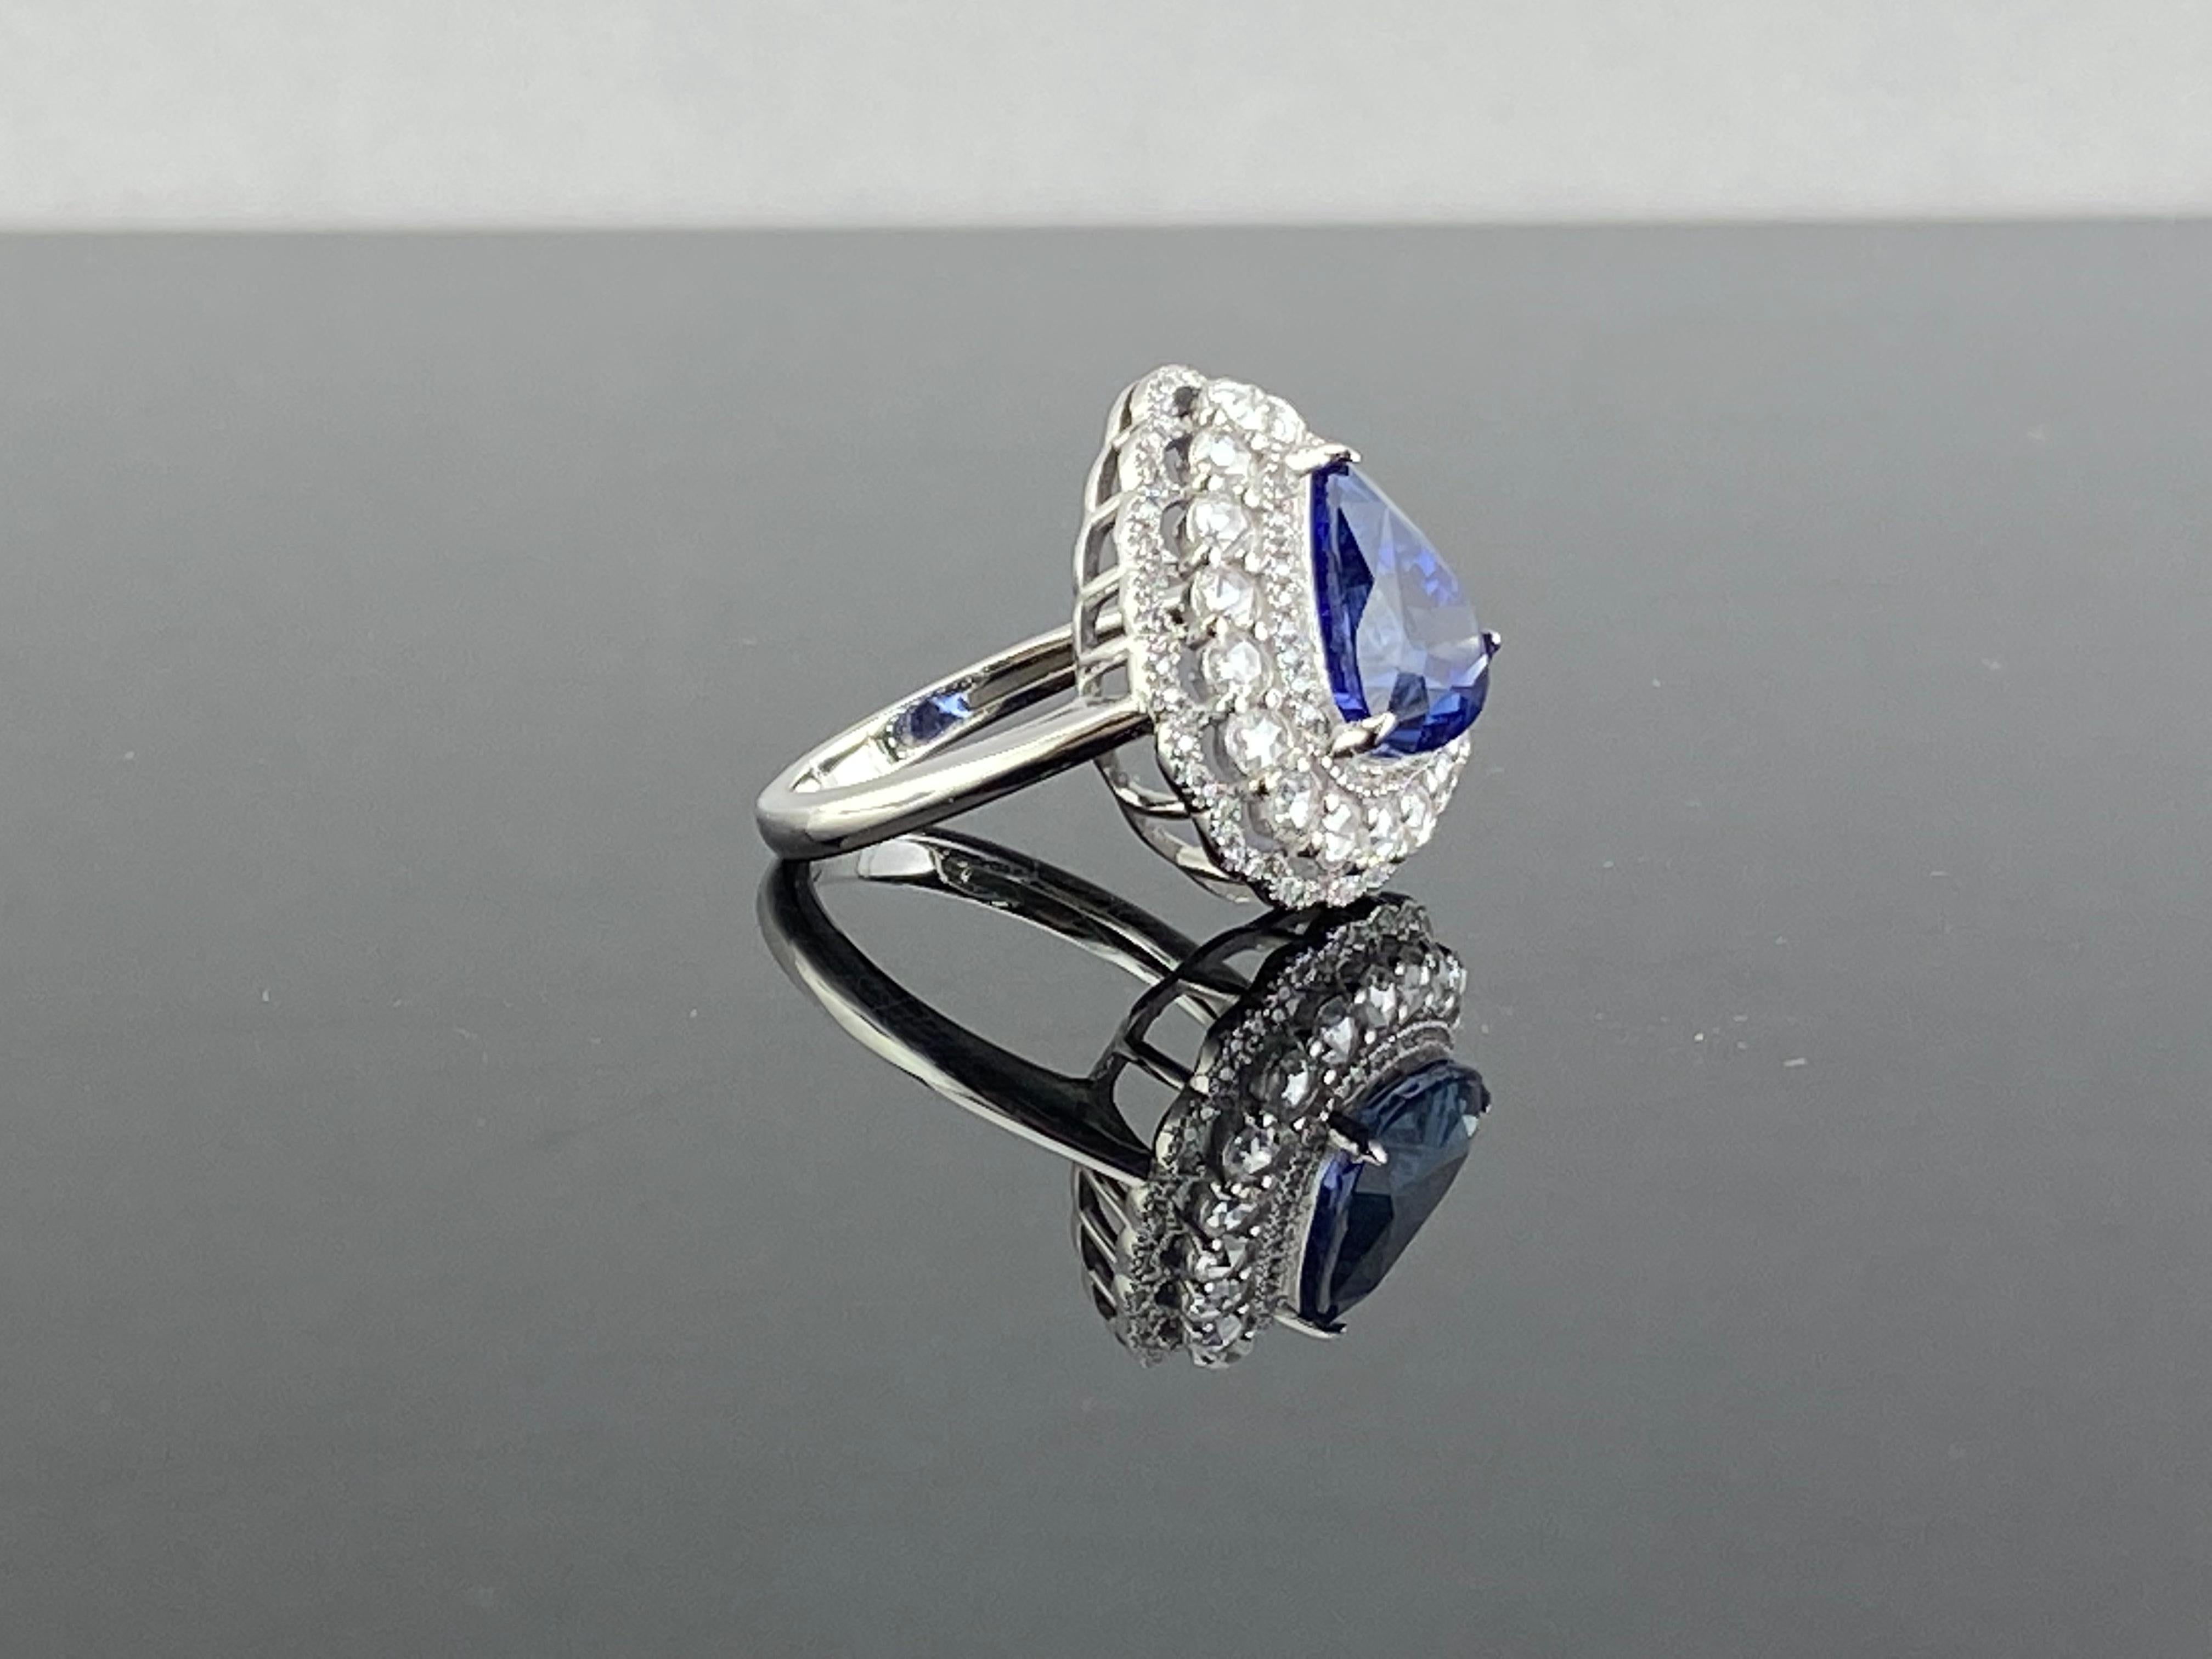 A one of a kind, 5.30 carat pear shaped, royal blue, Sri Lankan Blue Sapphire - absolutely transparent with no inclusions, great color and luster, surrounded by full cut and rose cut White Diamonds, all set in solid 18K White Gold. Currently sized